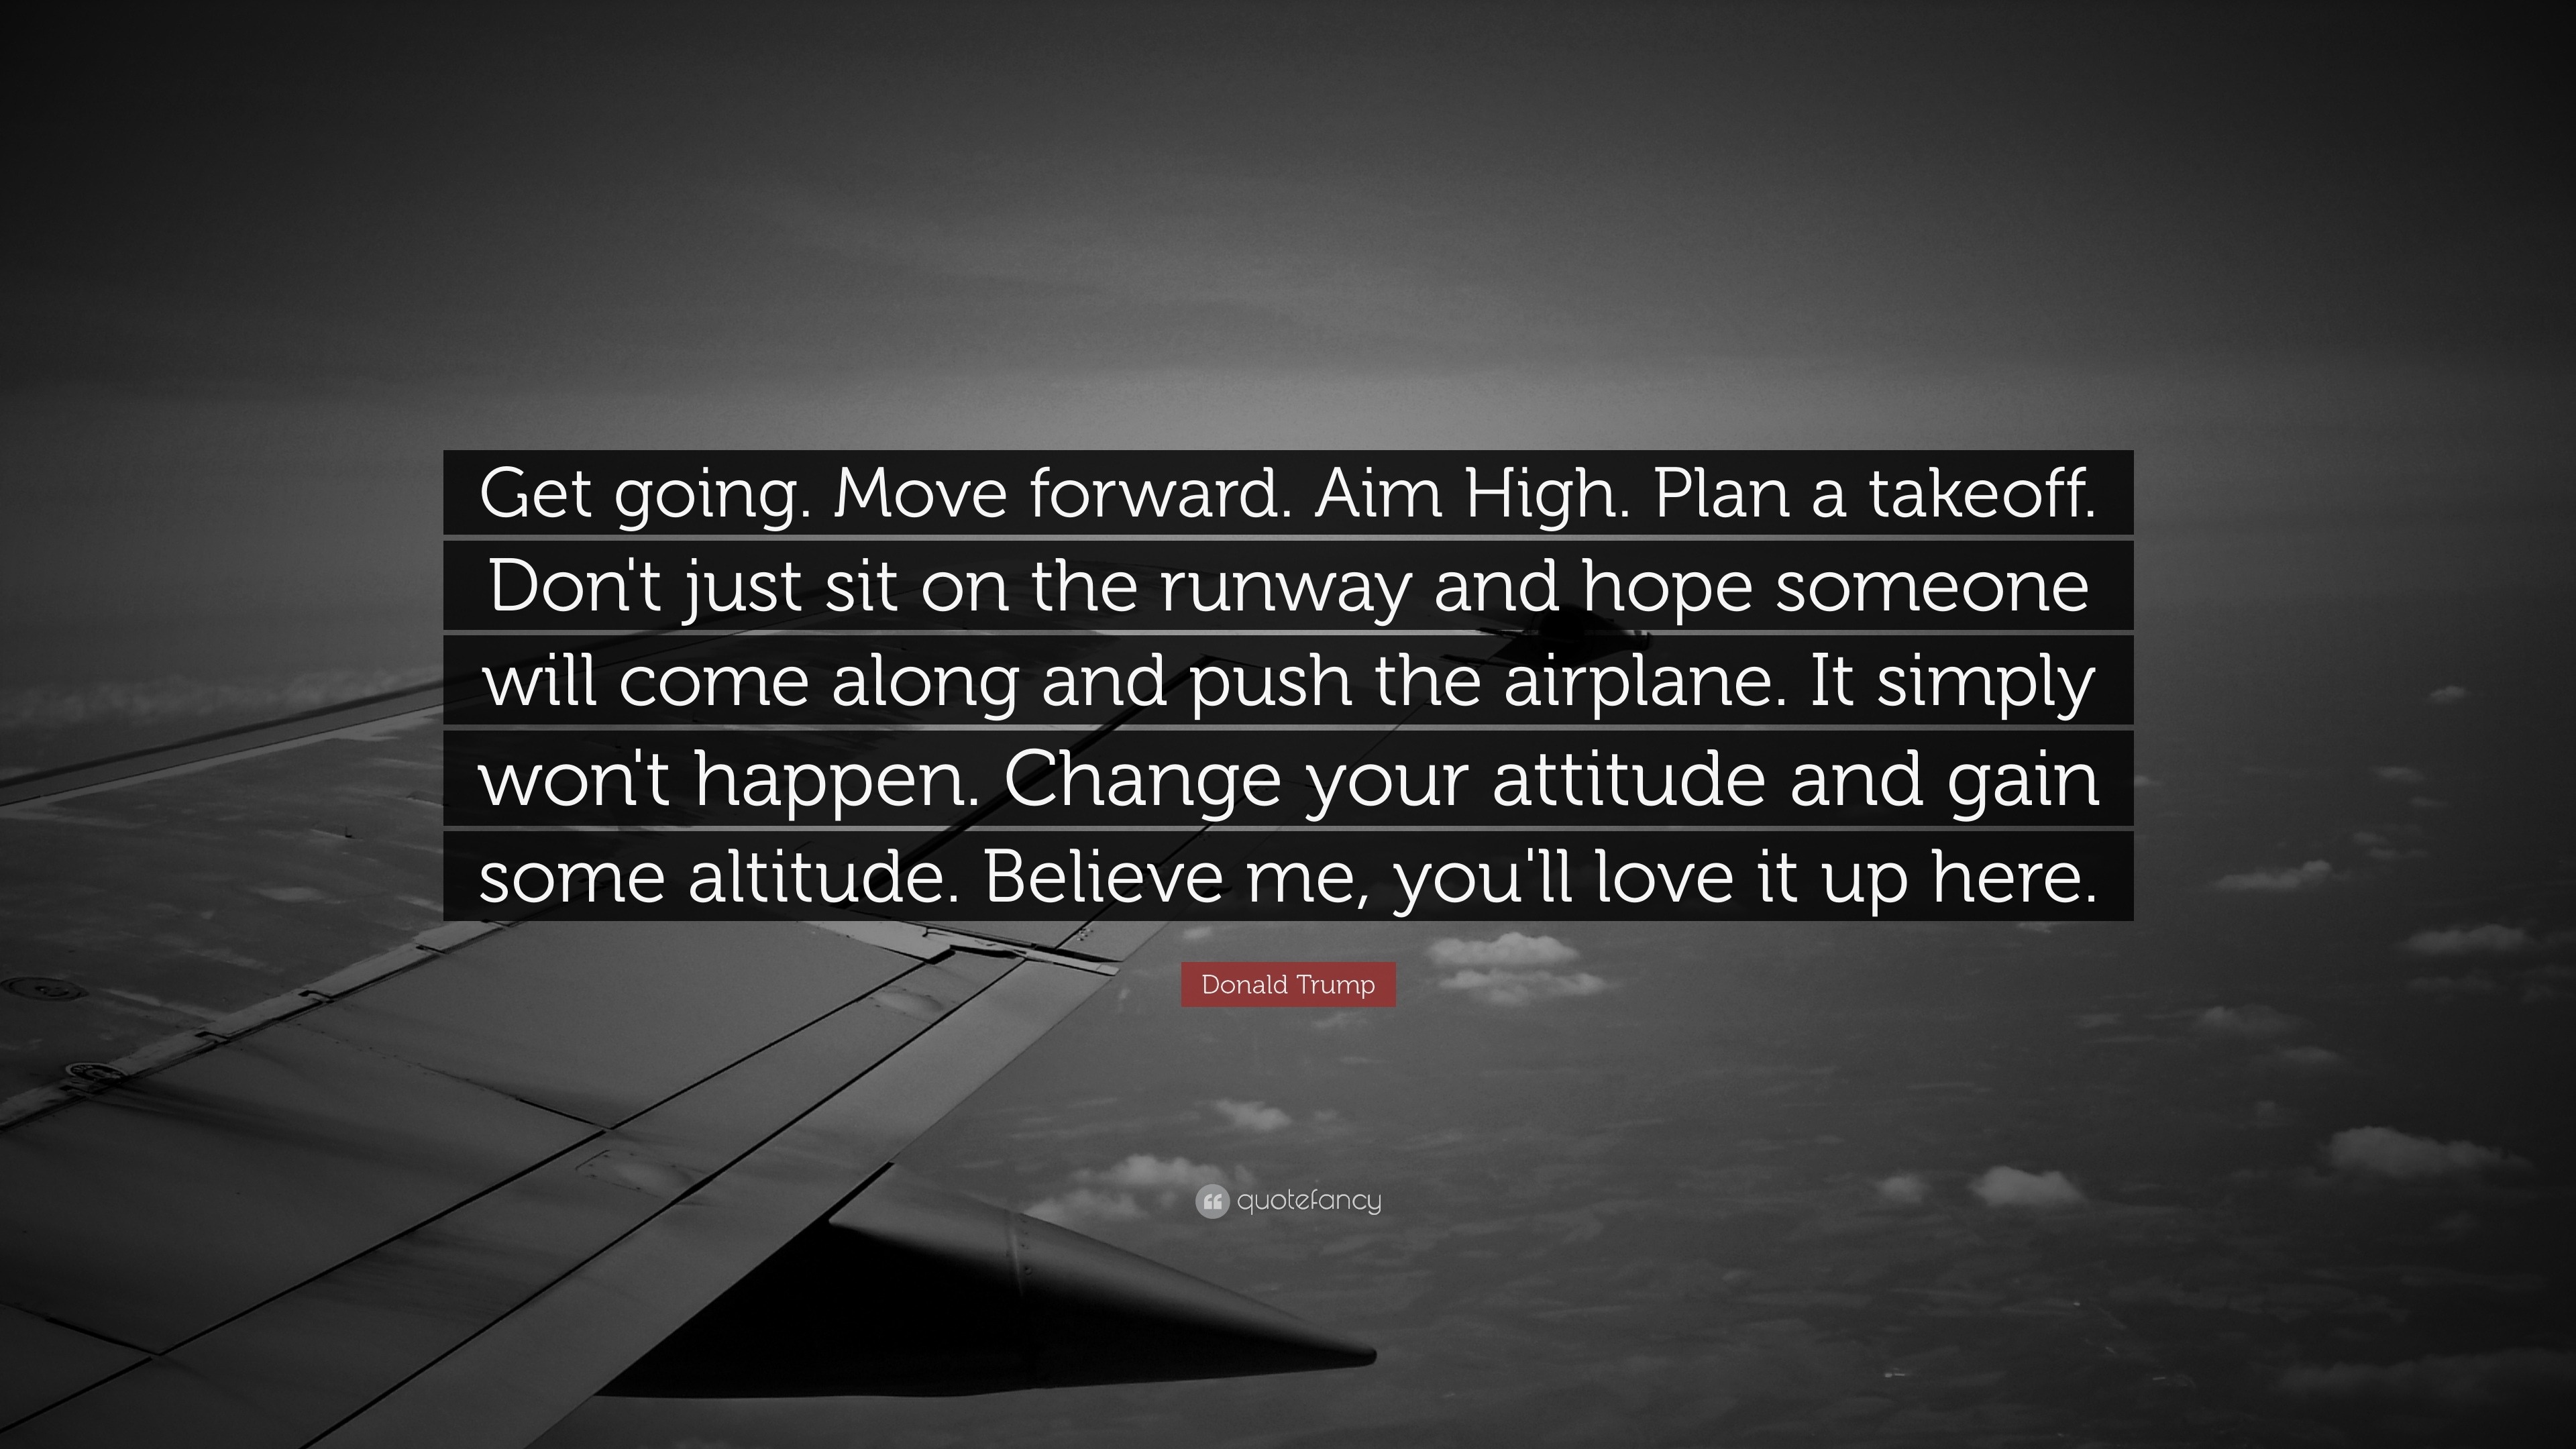 Donald Trump Quote “Get going Move forward Aim High Plan a